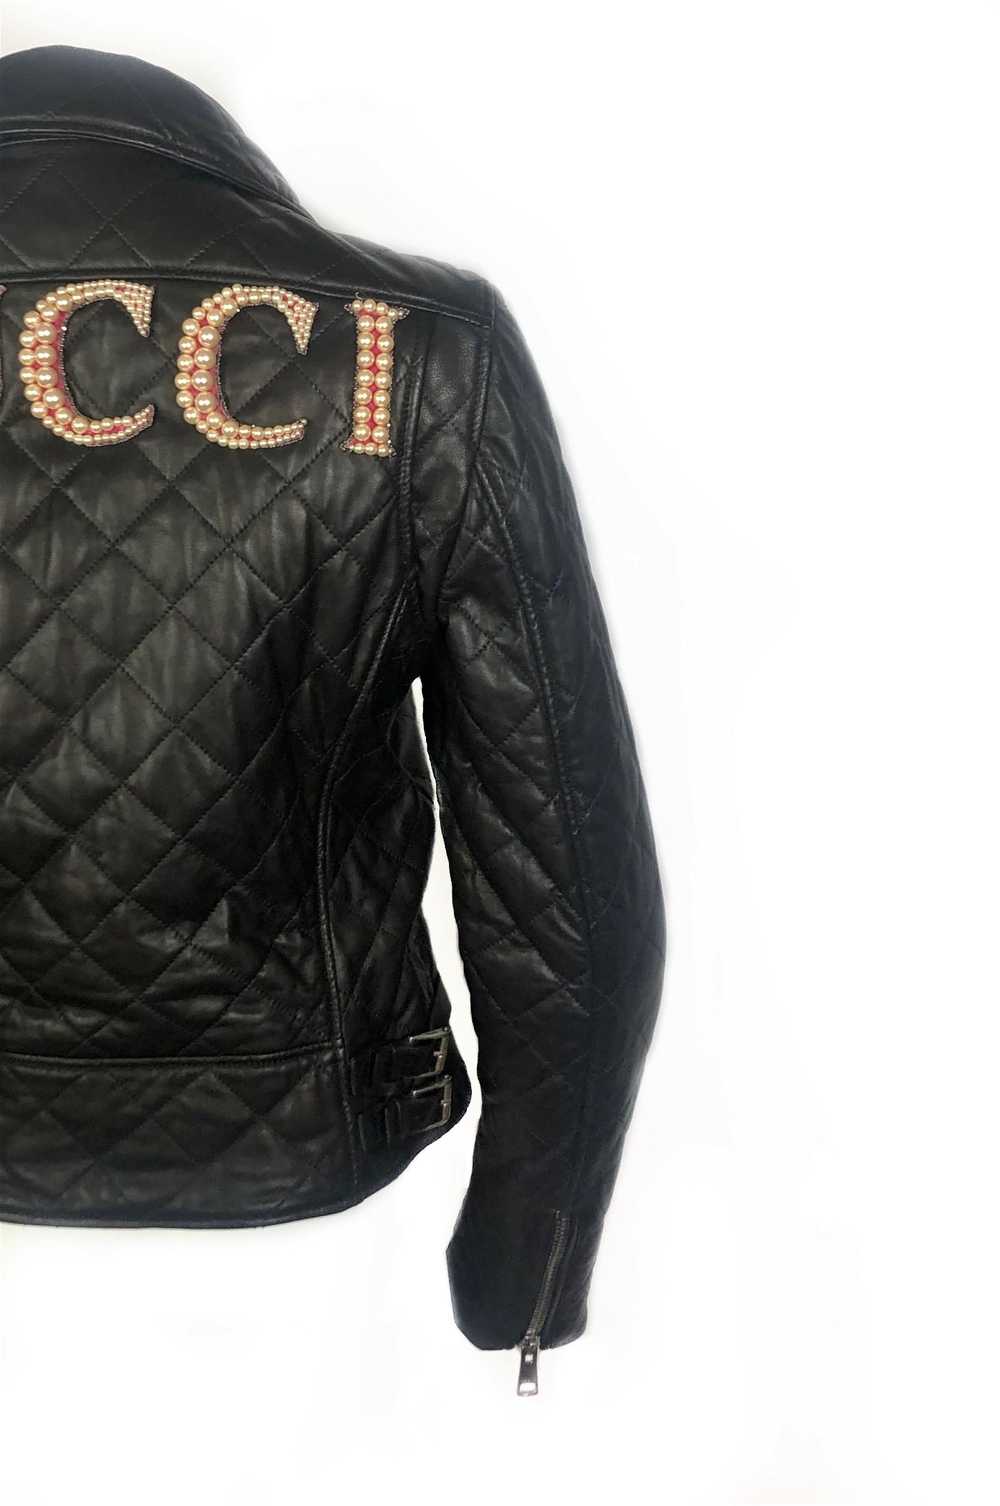 GUCCI Brown Leather Moto Jacket w/ Pearls Size 44 - image 10